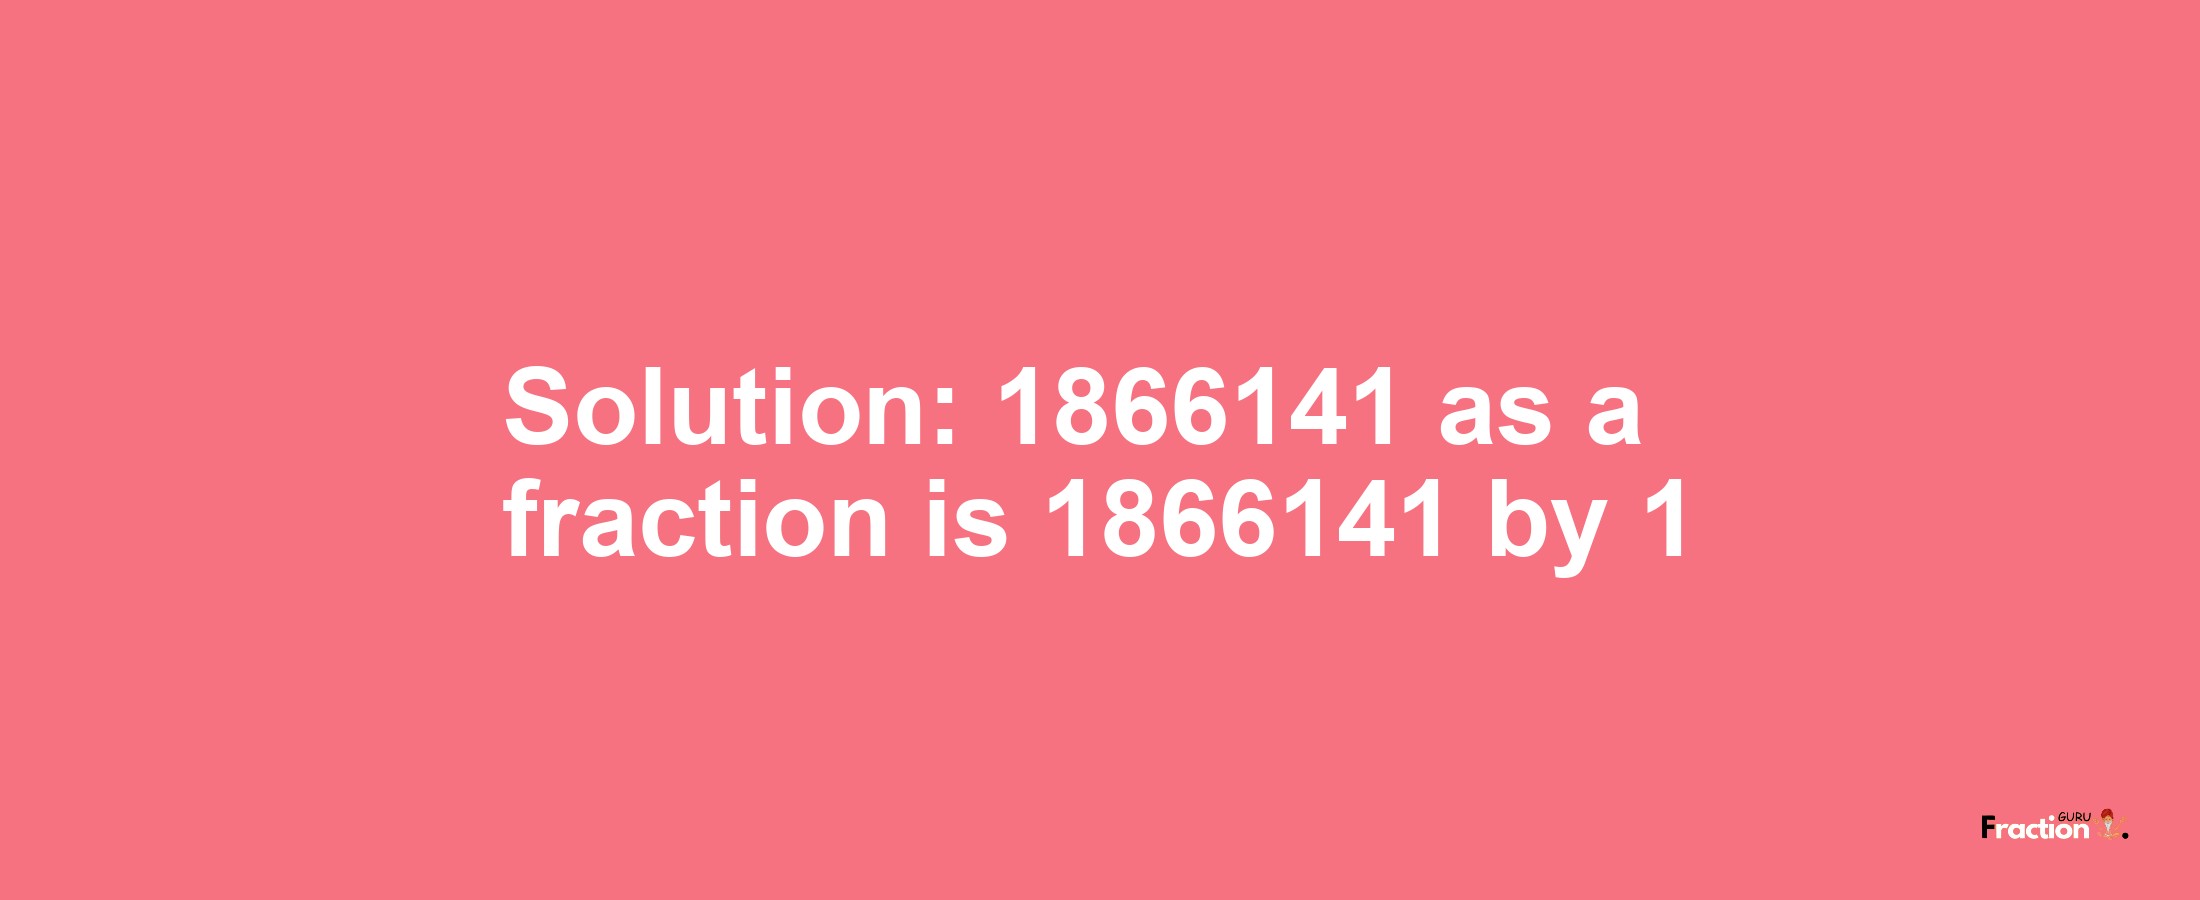 Solution:1866141 as a fraction is 1866141/1